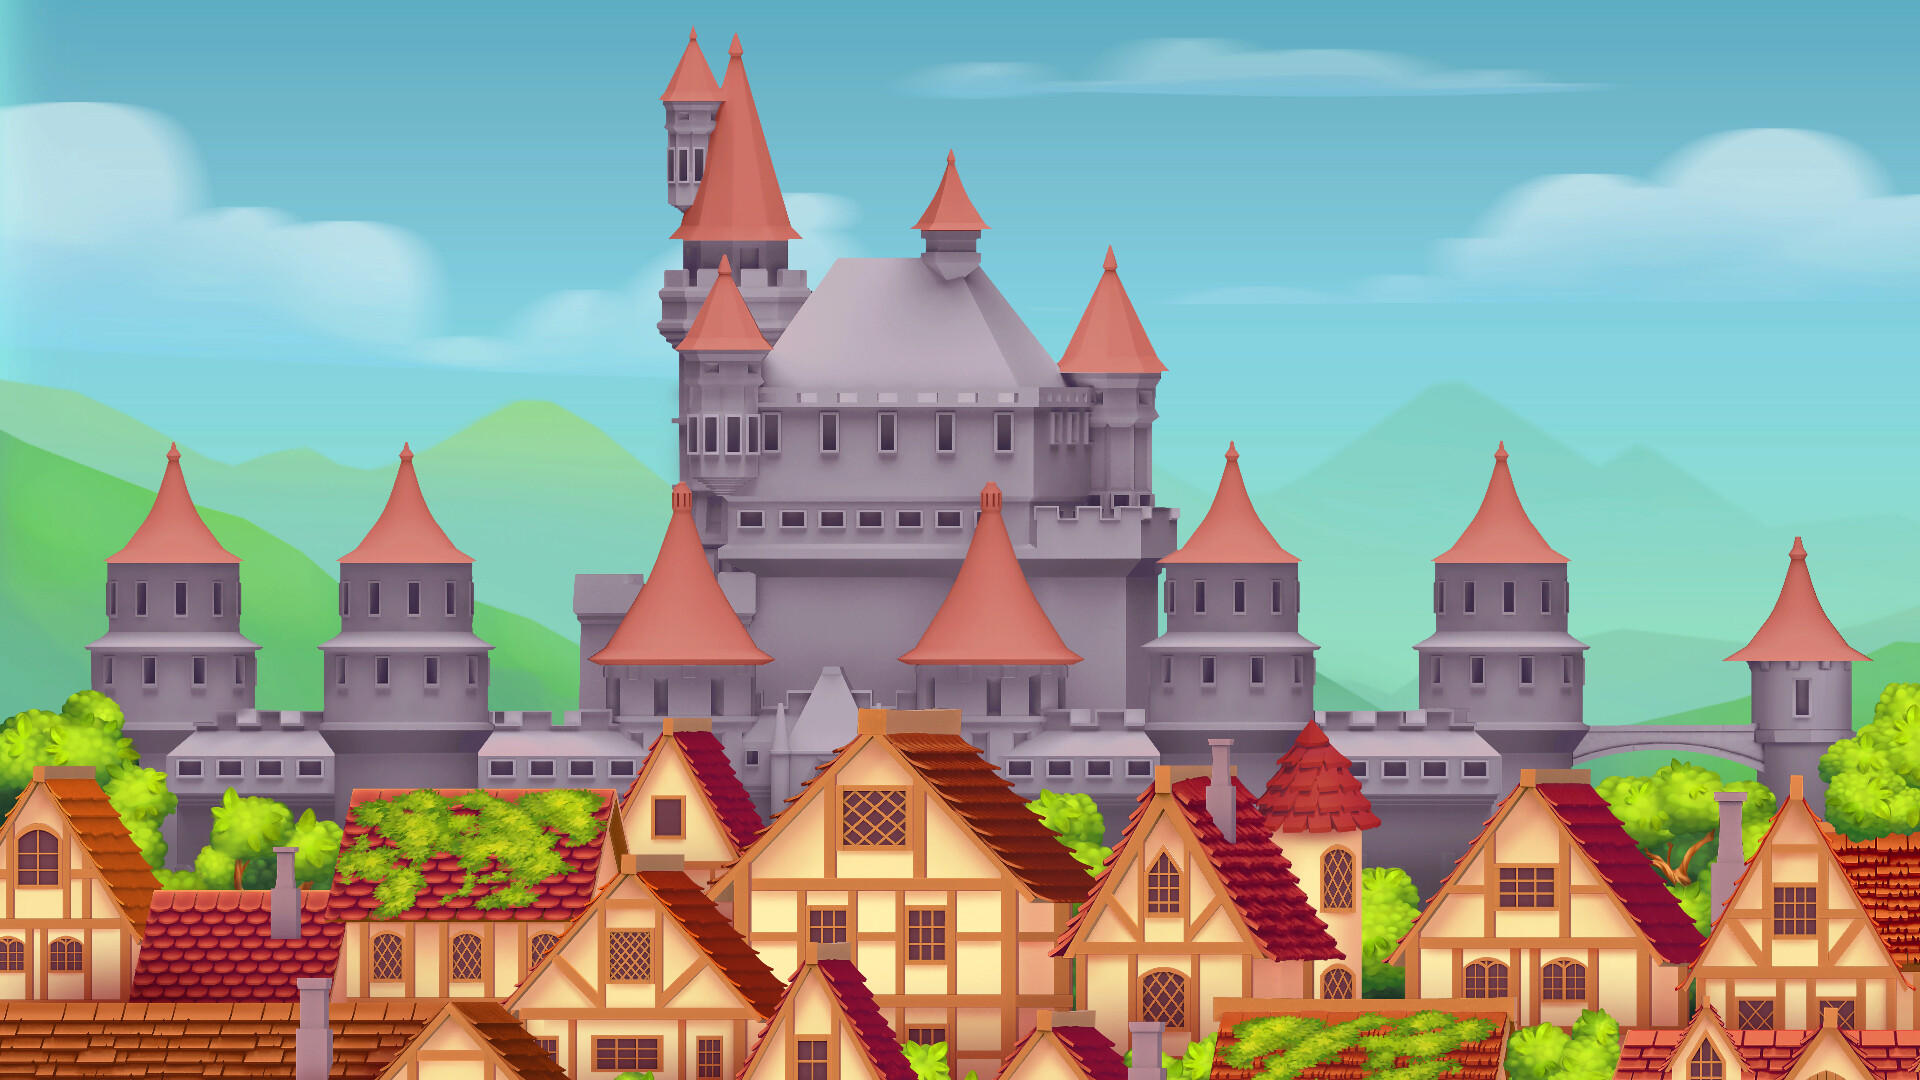 Cat Search in Medieval Times screenshot game